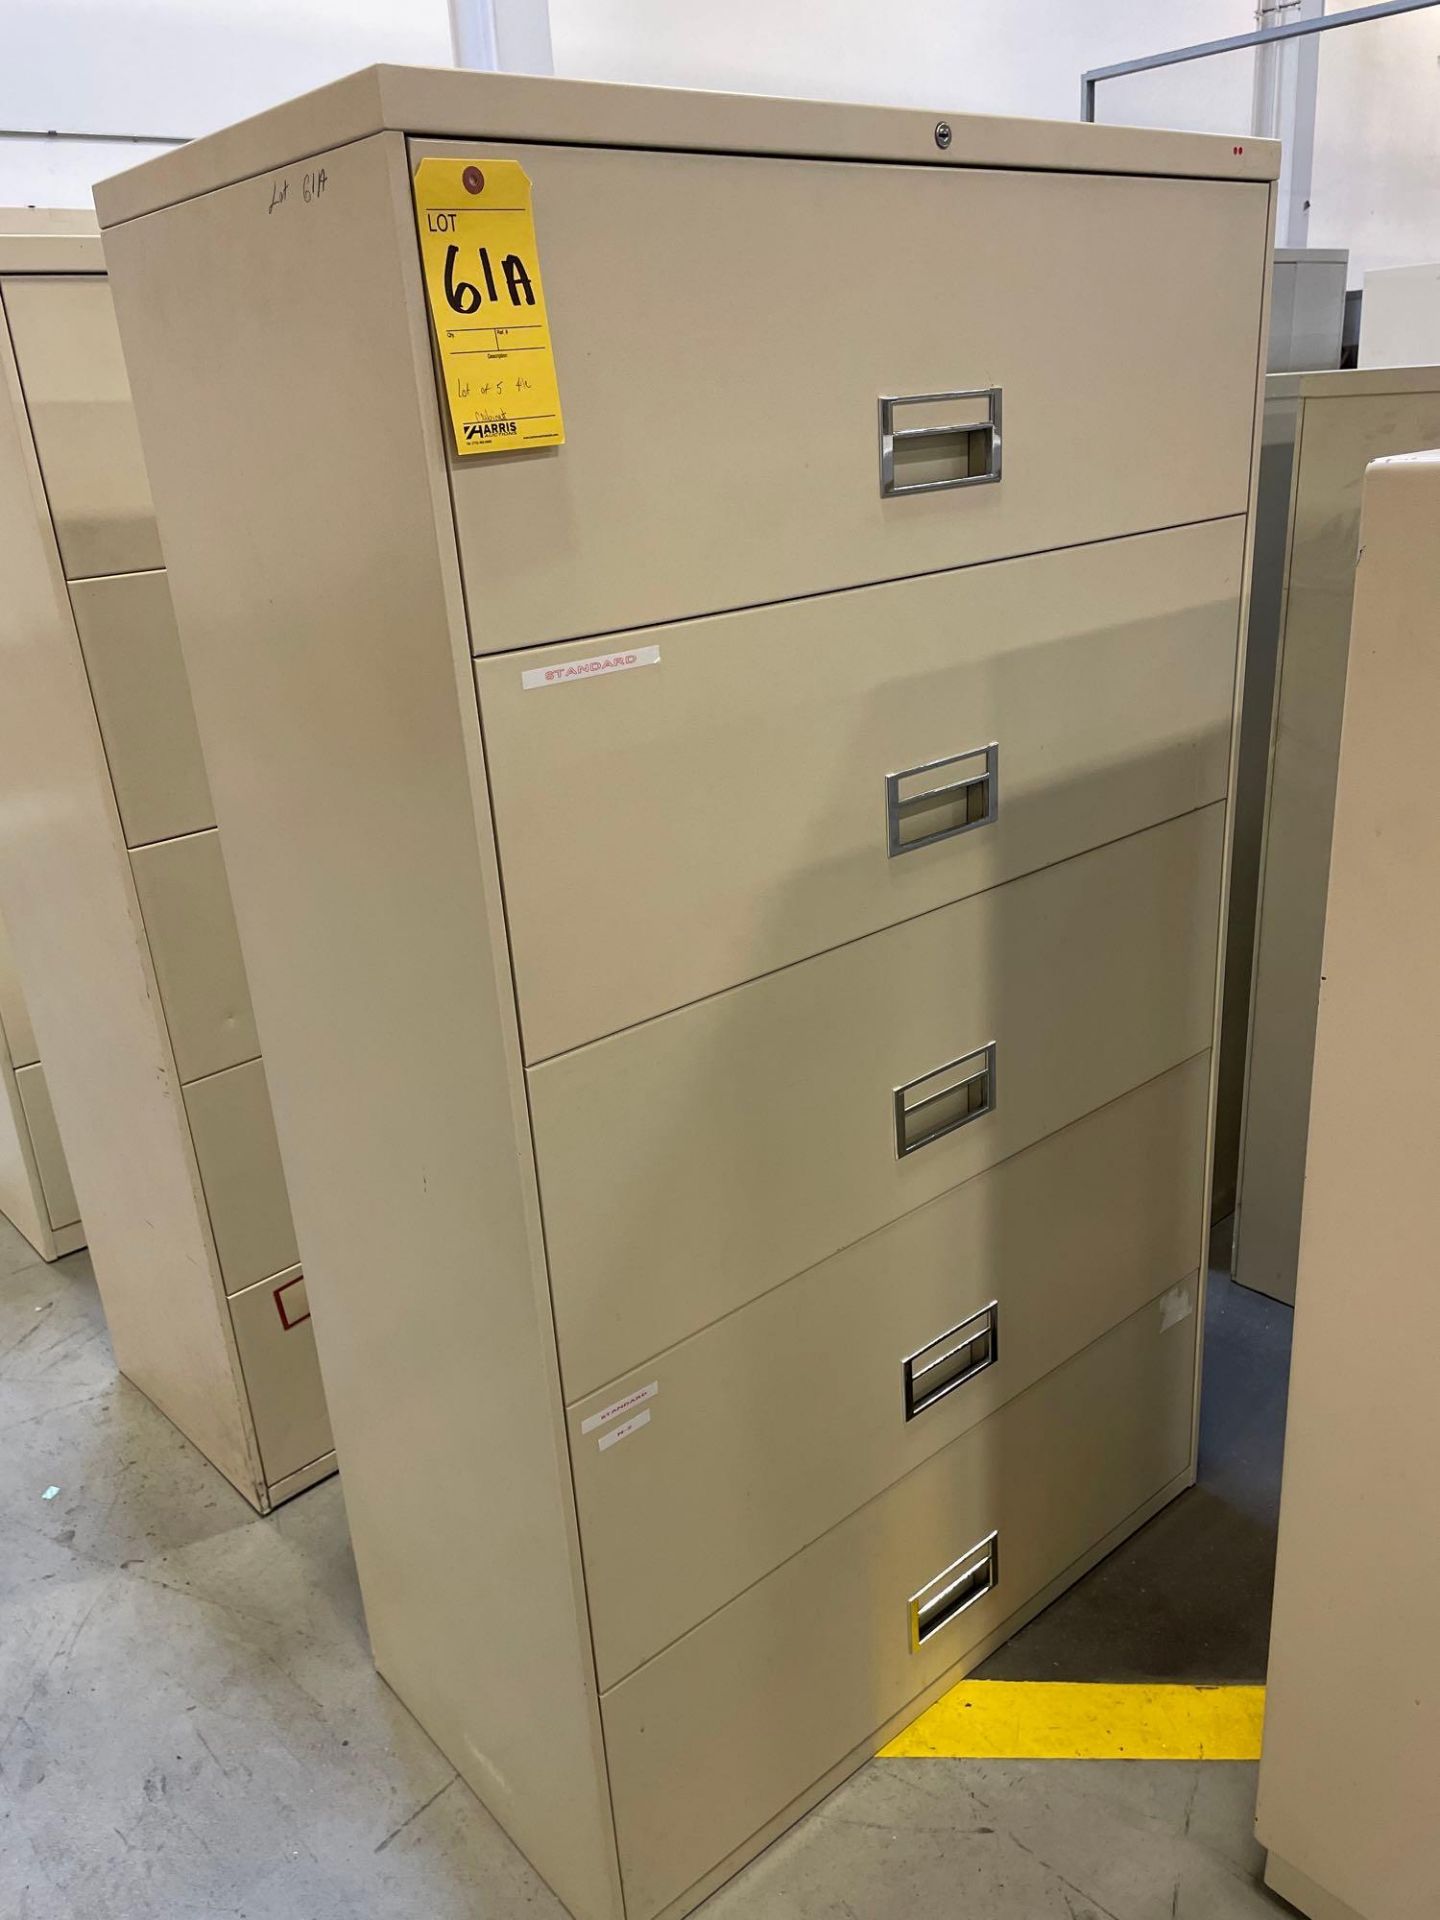 Lot of 5 File Cabinets, 5 Drawer: (4) 36" X 18" X 60", (1) 36" X 18" X 66" - Image 7 of 7